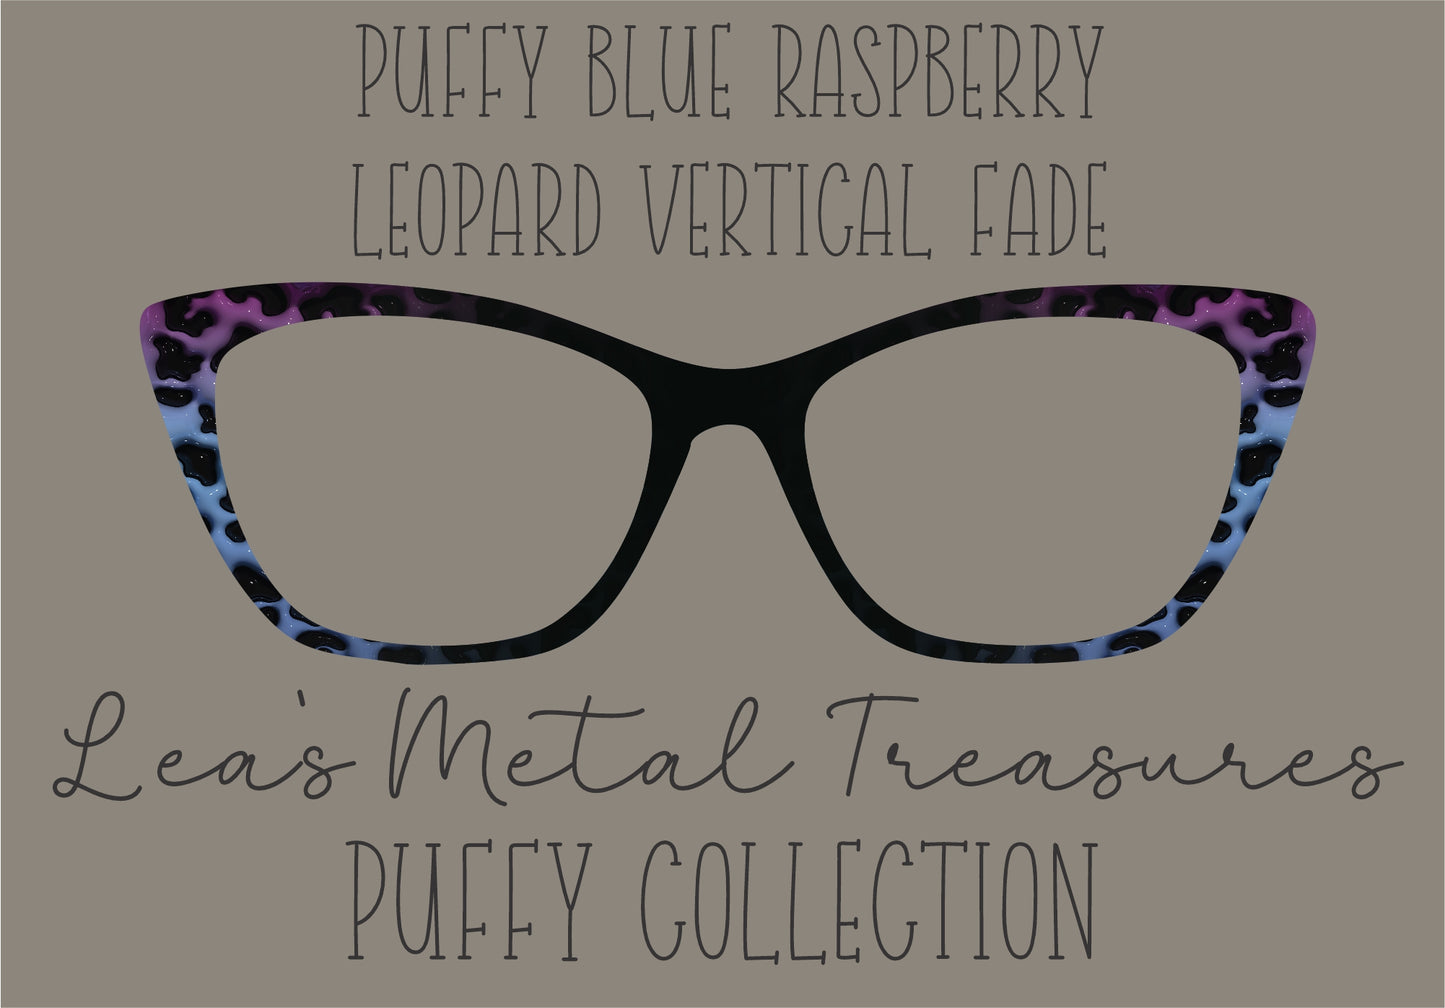 PUFFY BLUE RASPBERRY LEOPARD VERTICAL FADE Eyewear Frame Toppers COMES WITH MAGNETS